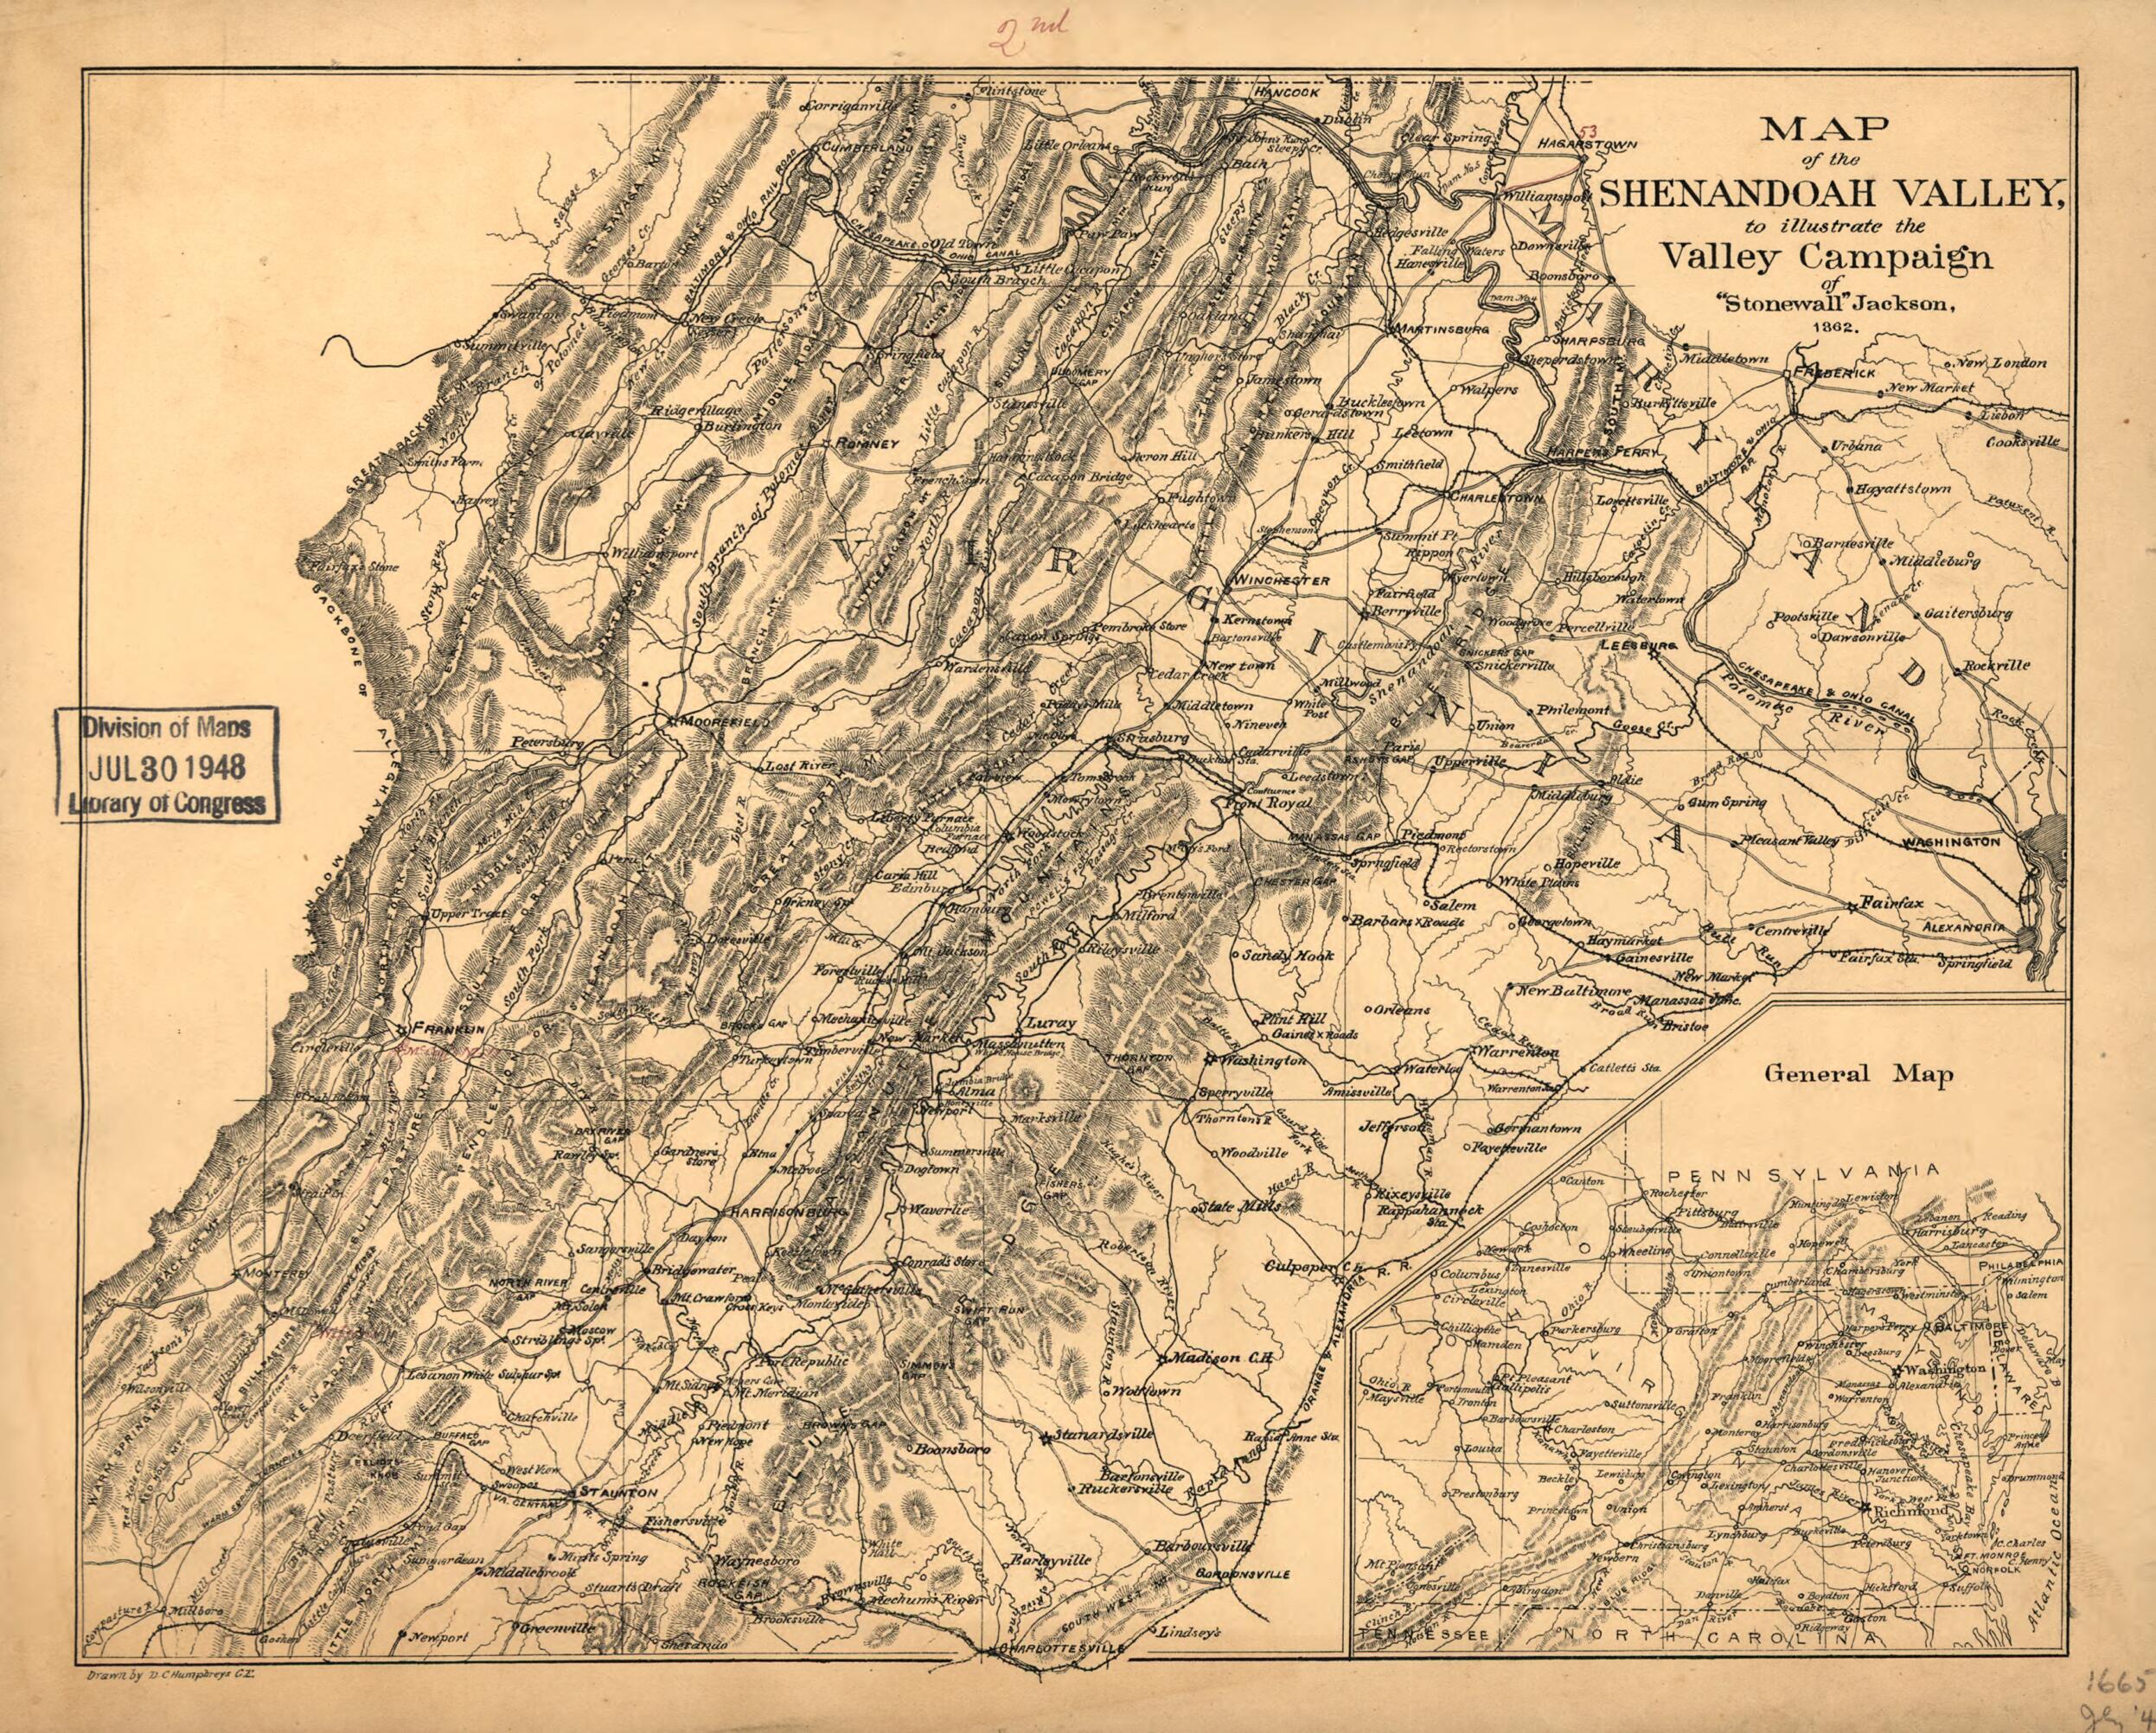 This old map of Map of the Shenandoah Valley, to Illustrate the Valley Campaign of Stonewall Jackson, 1862: from 1880 was created by Jedediah Hotchkiss, D.C. Humphreys,  J.B. Lippincott &amp; Co in 1880